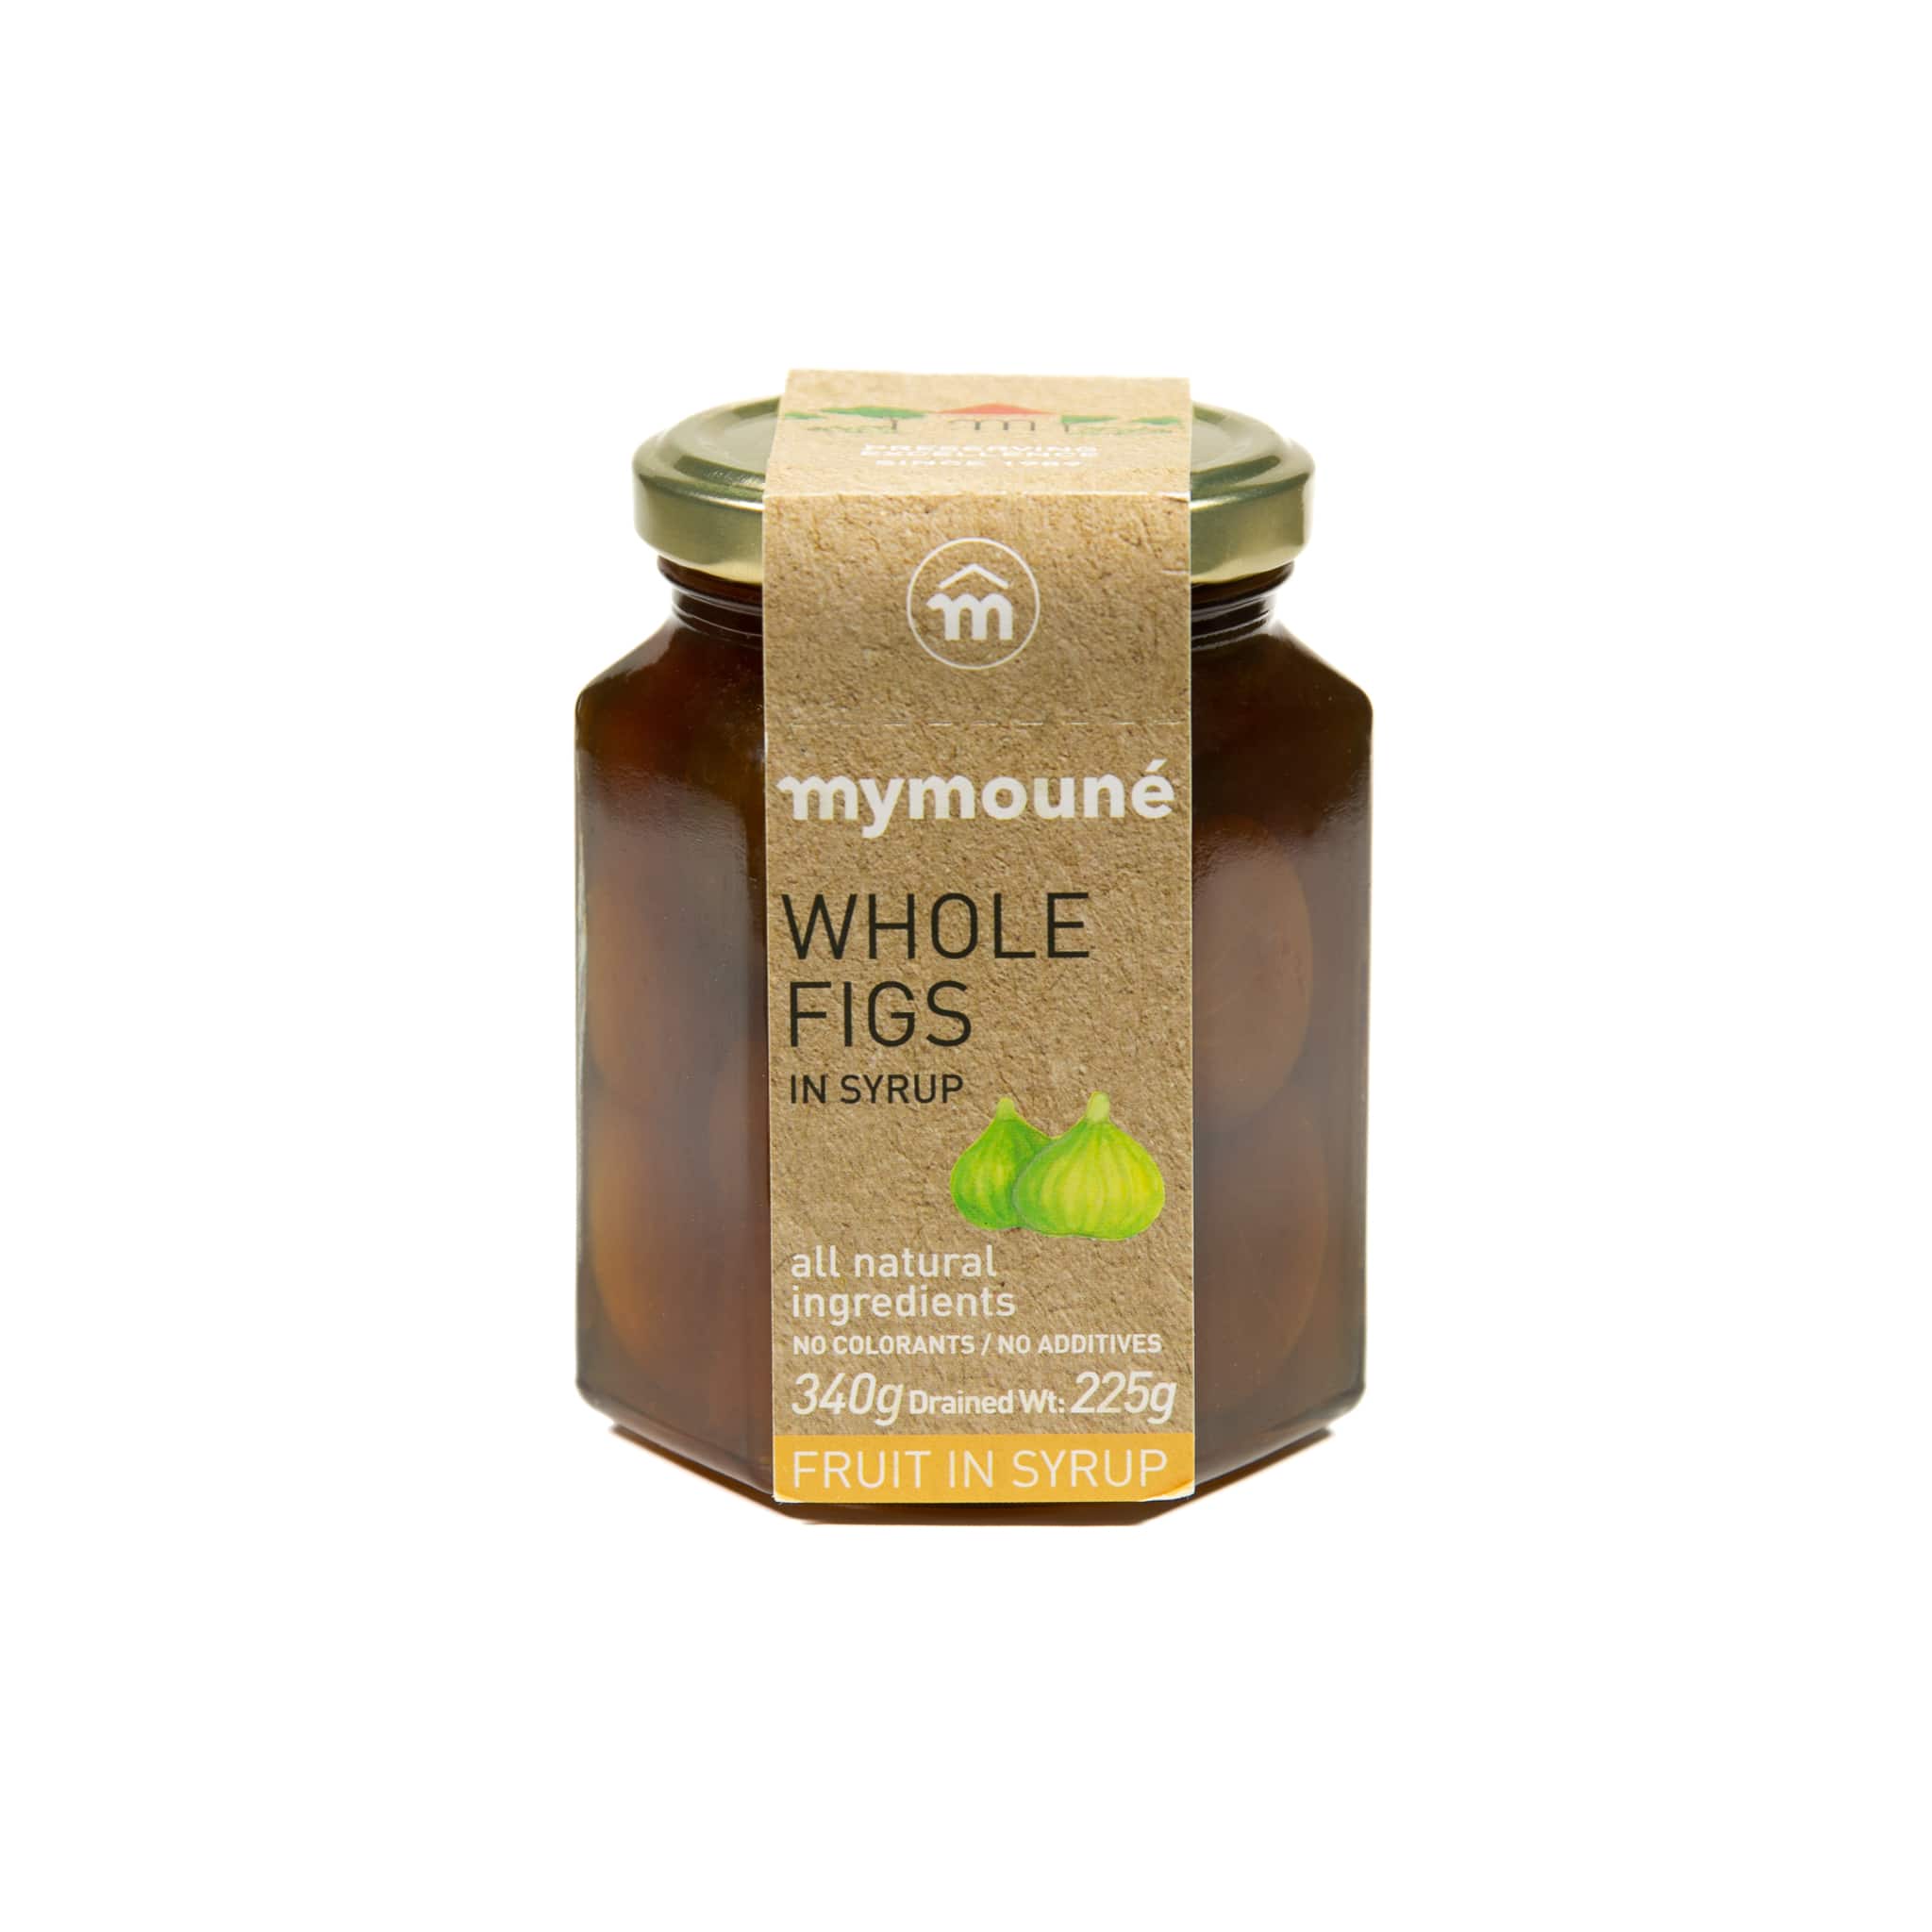 Mymoune Whole Figs in Syrup, 340g